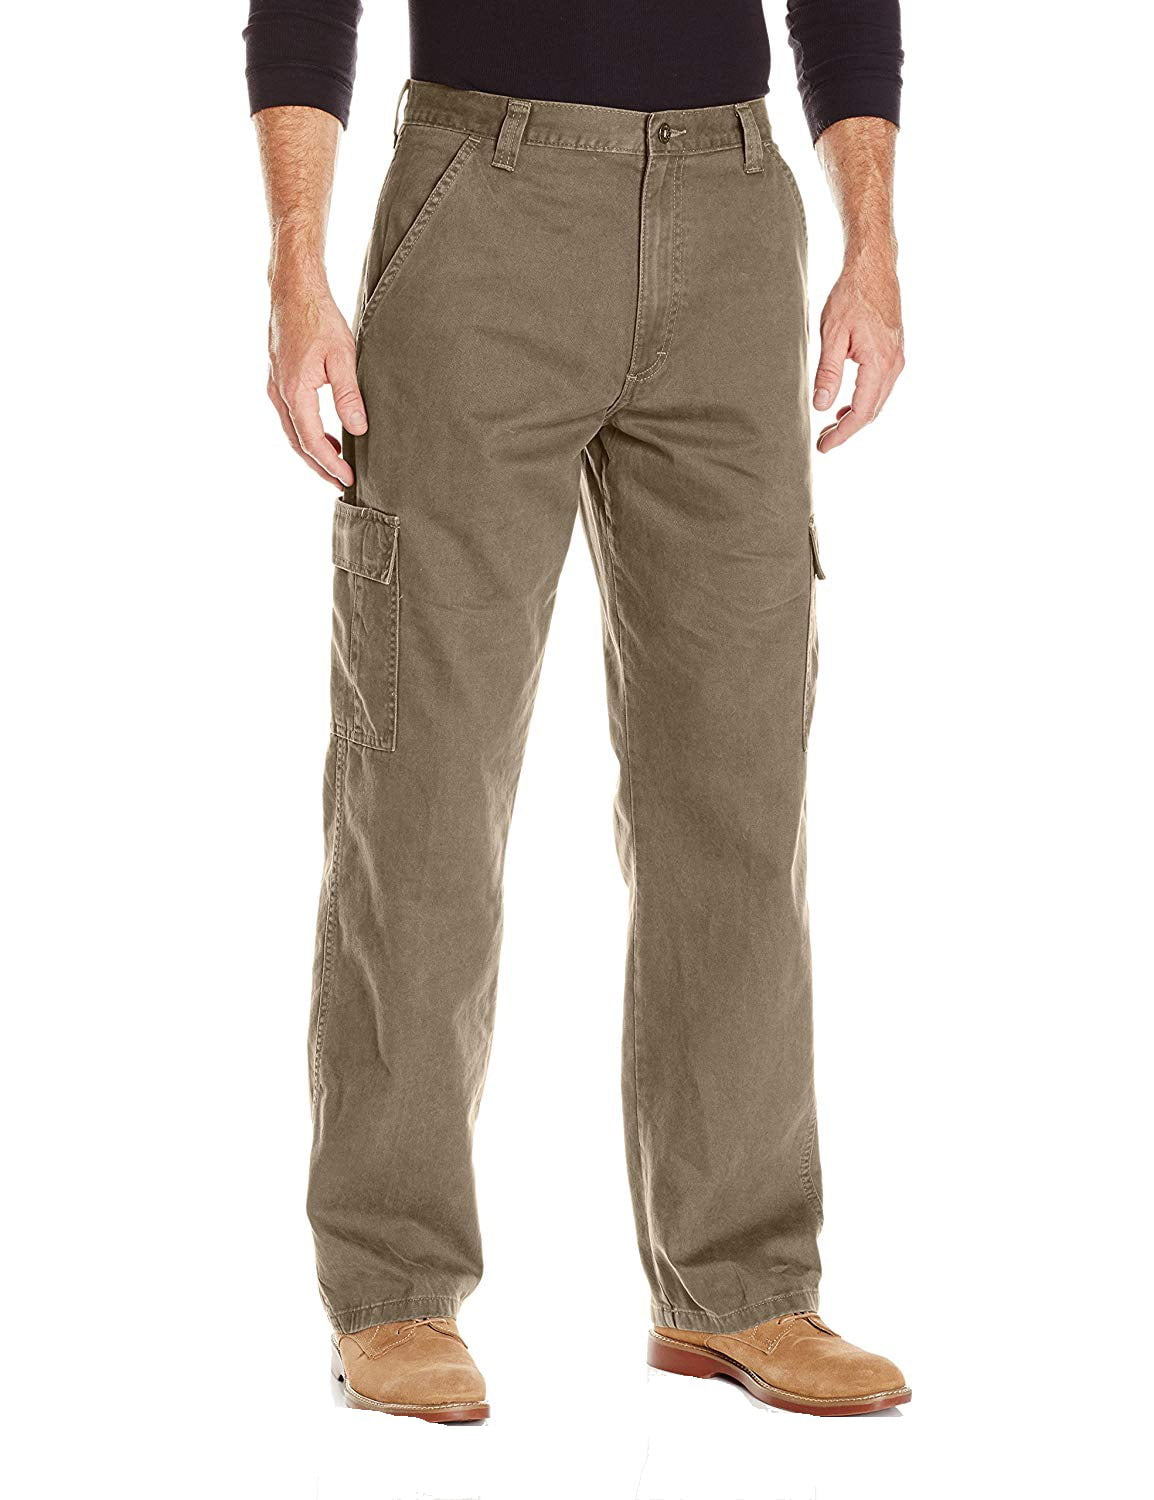 Wrangler Mens 34X30 Classic Twill Relaxed Fit Cargo Pant - Walmart.com ...